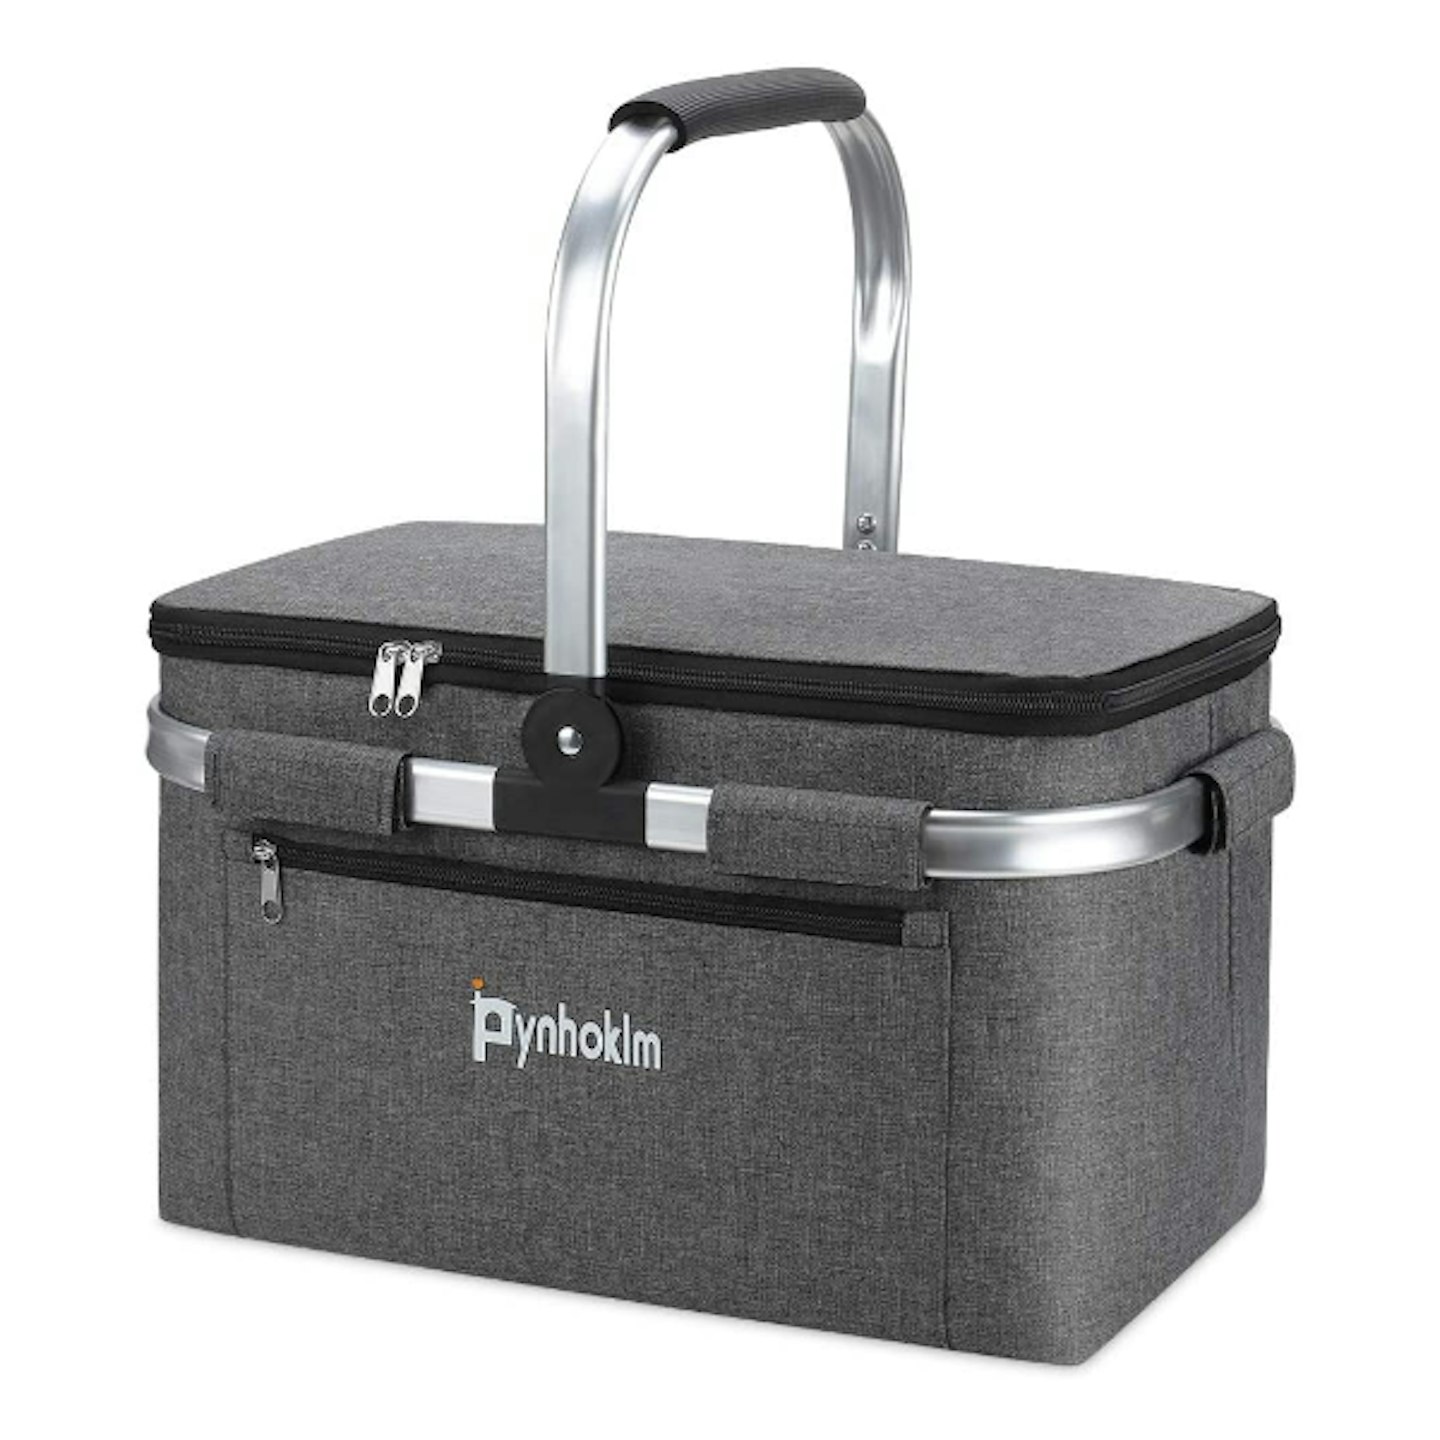 Pynhoklm 22L Insulated Picnic Basket